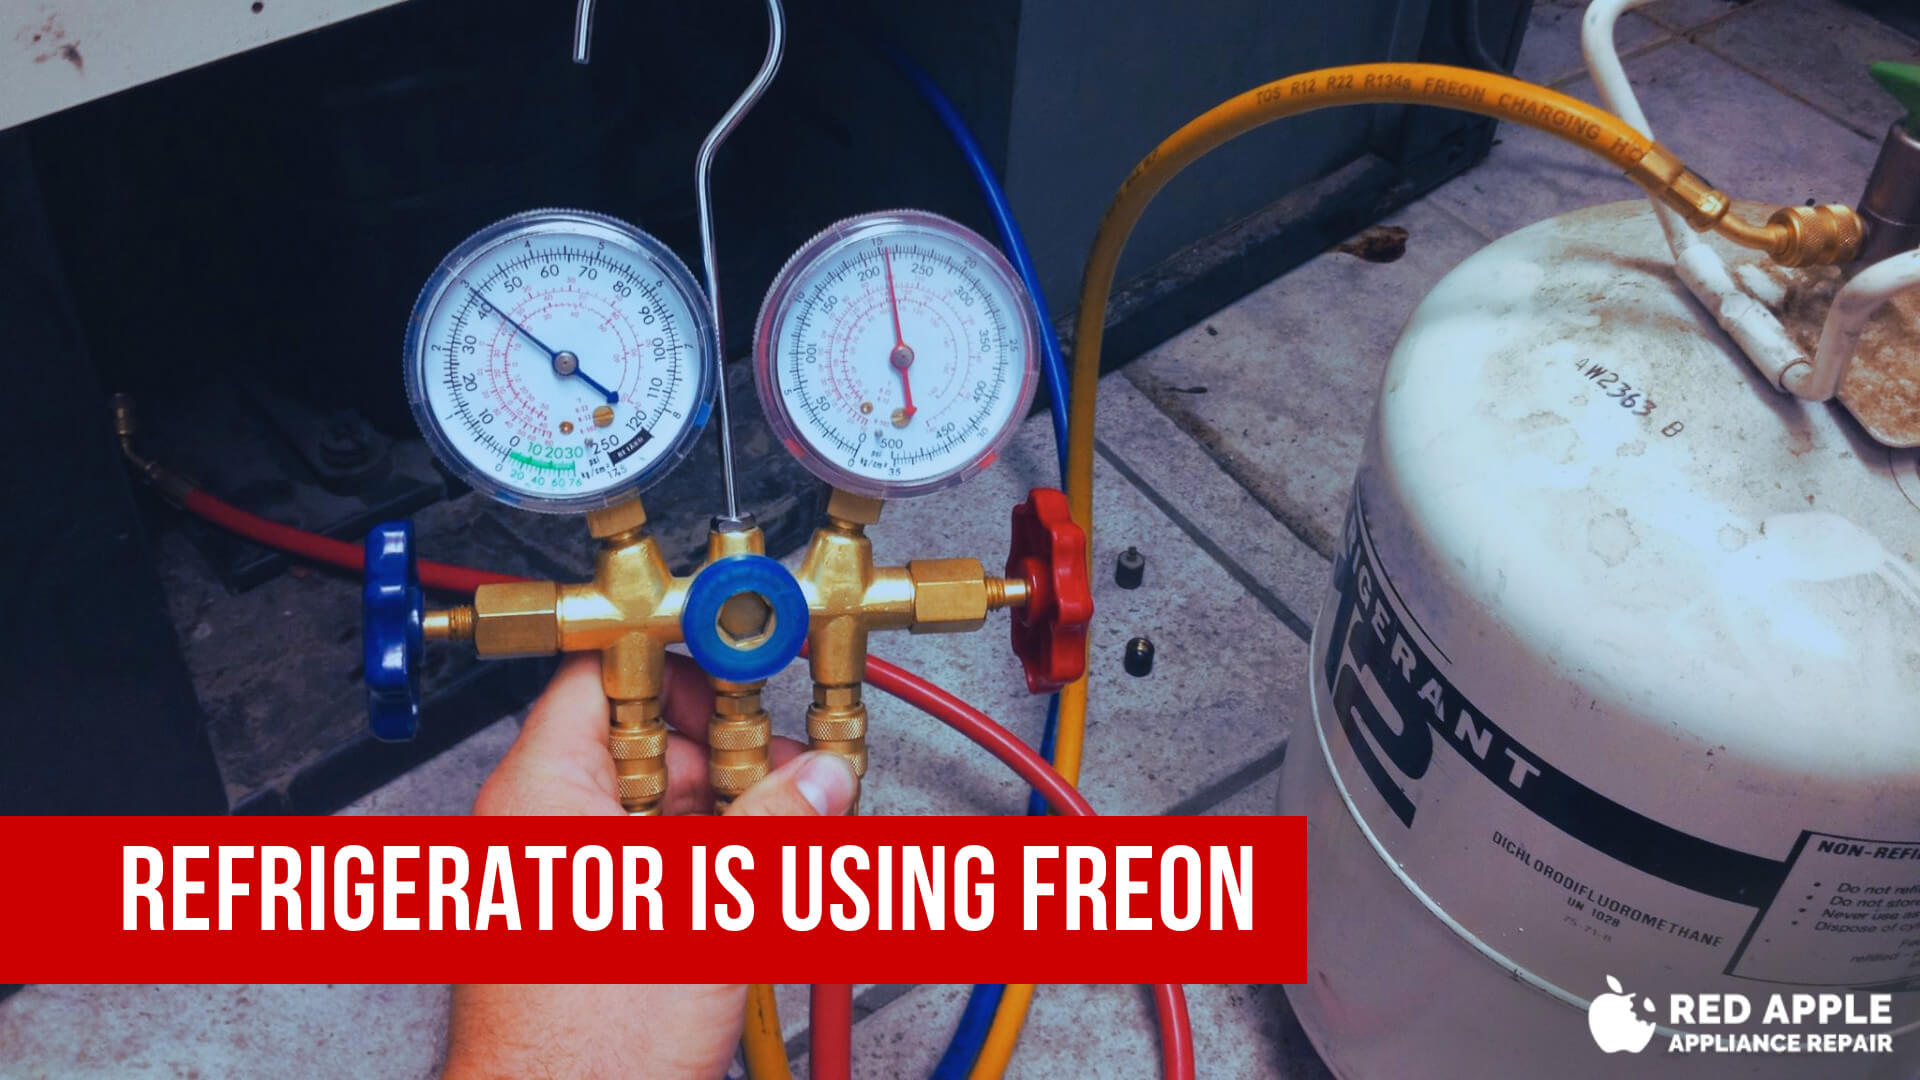 What is Freon?